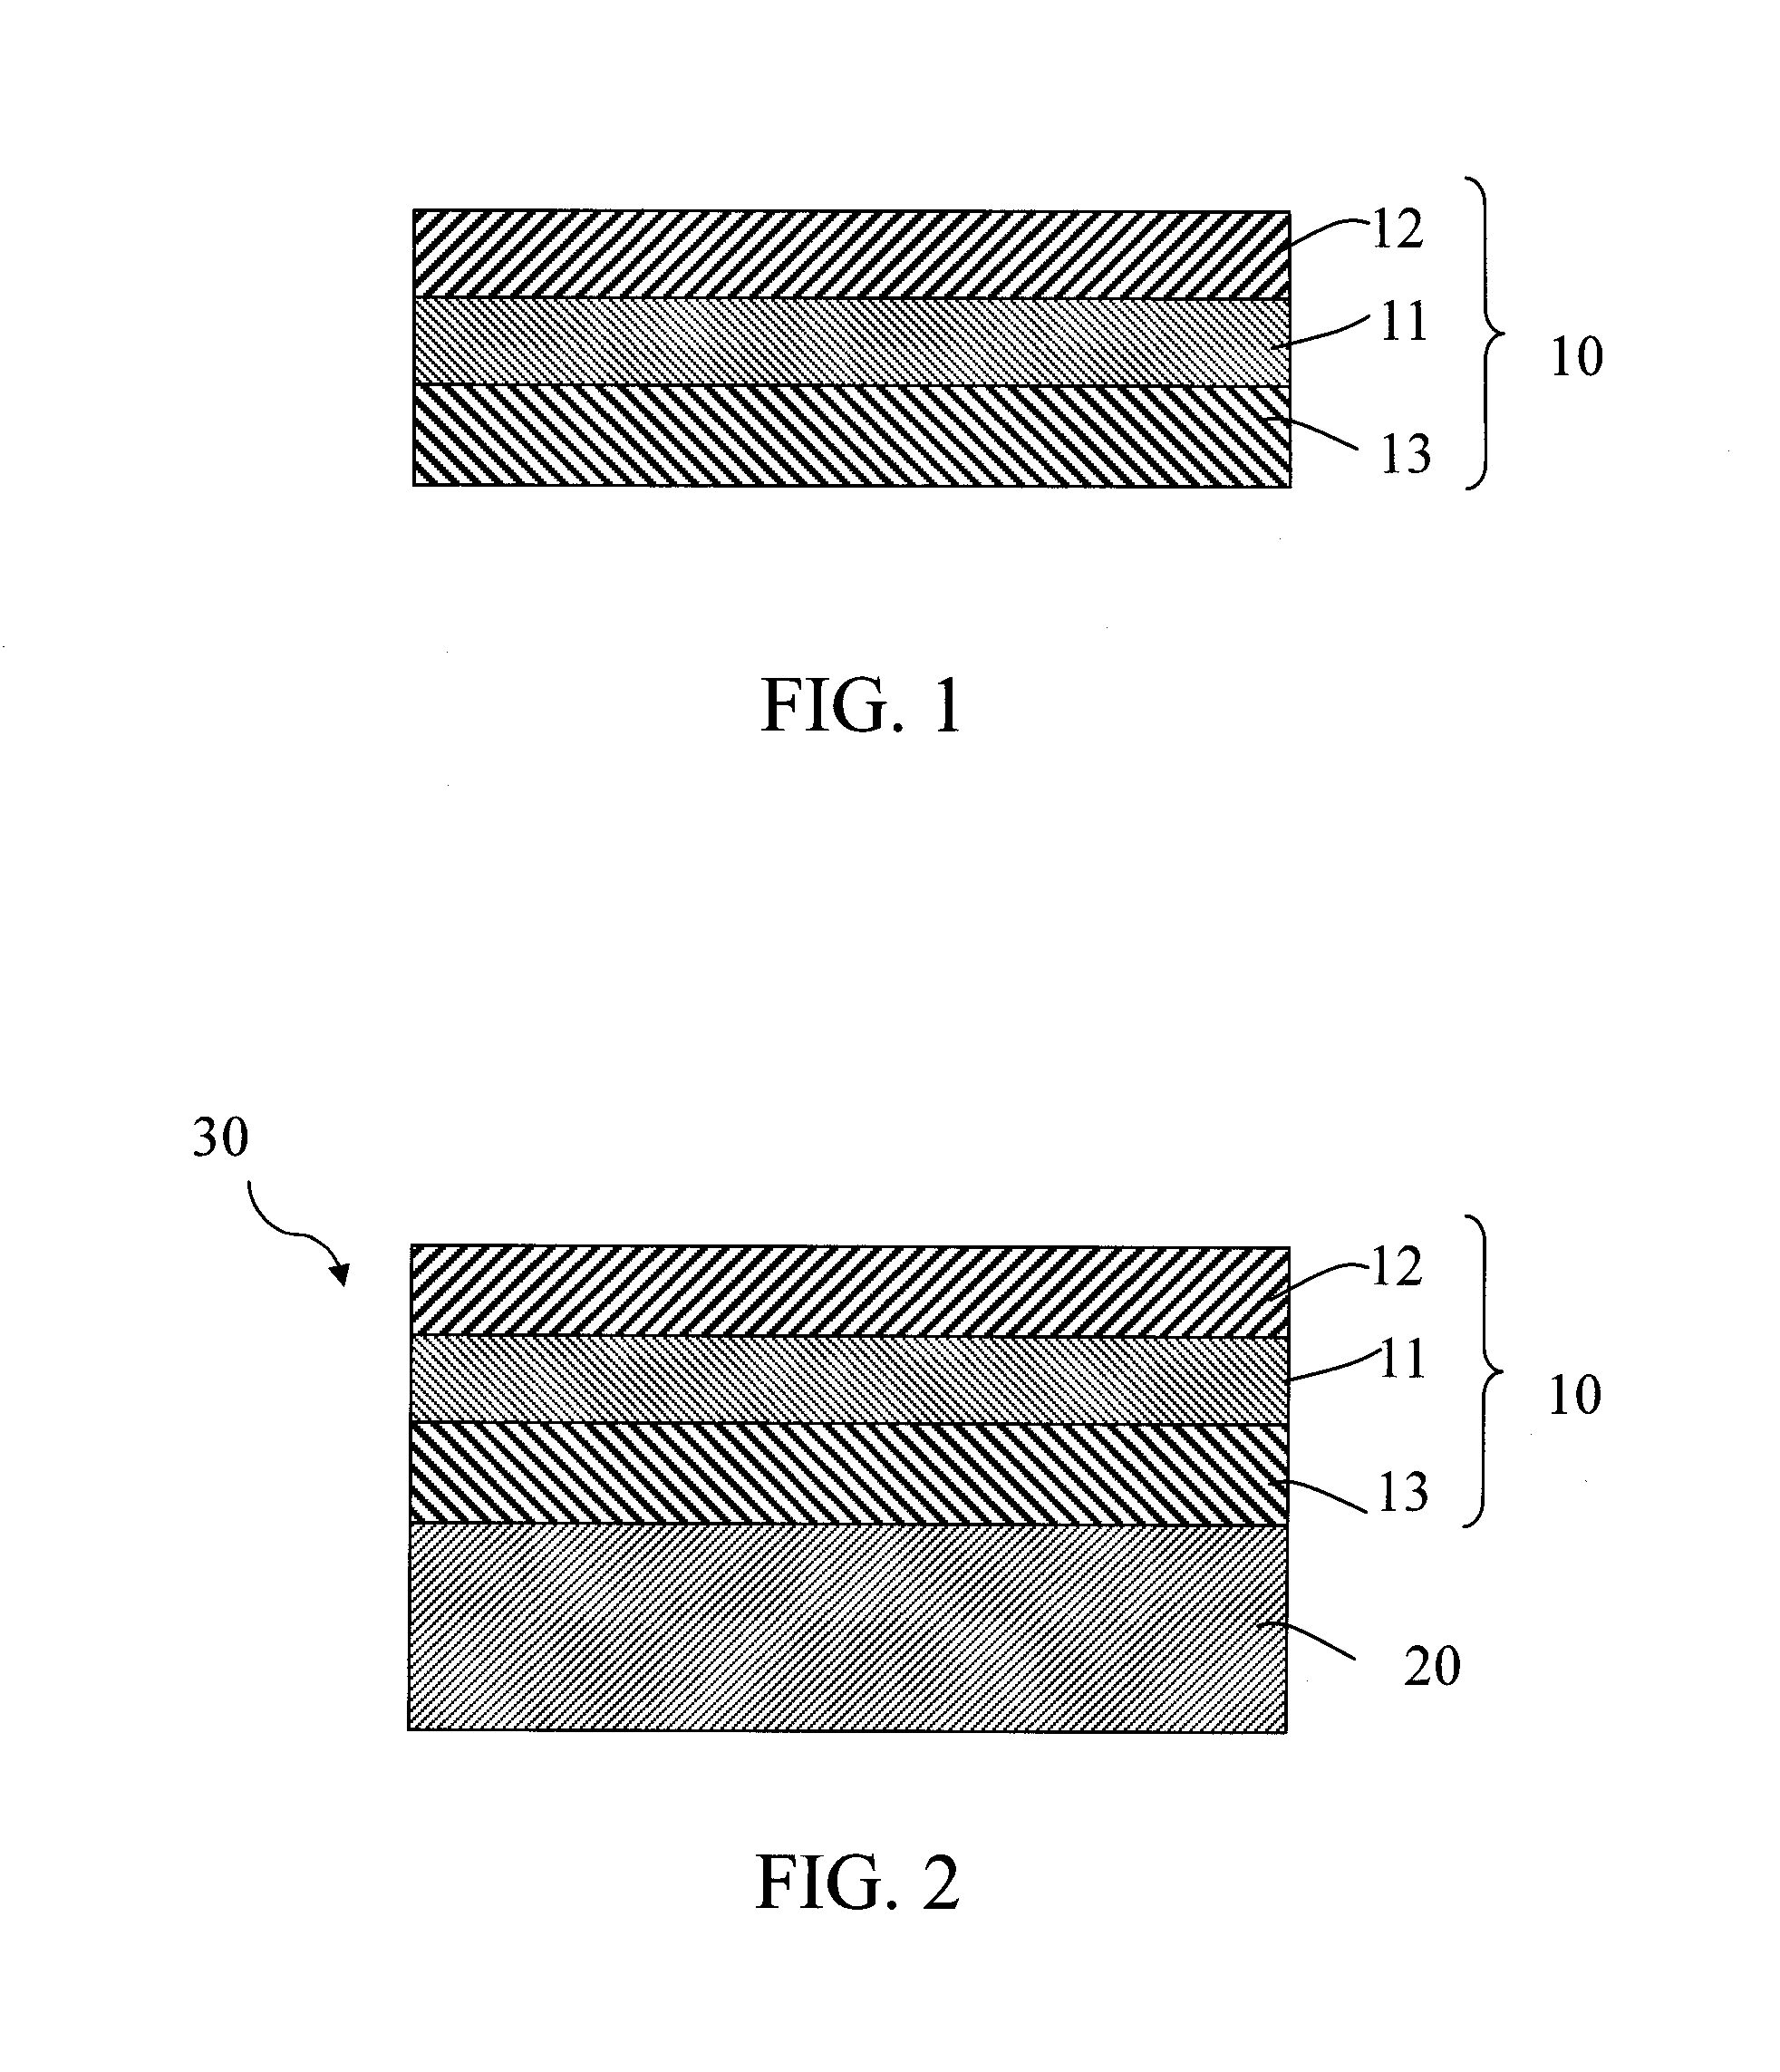 Cover layer with high thermal resistance and high reflectivity for a printed circuit board